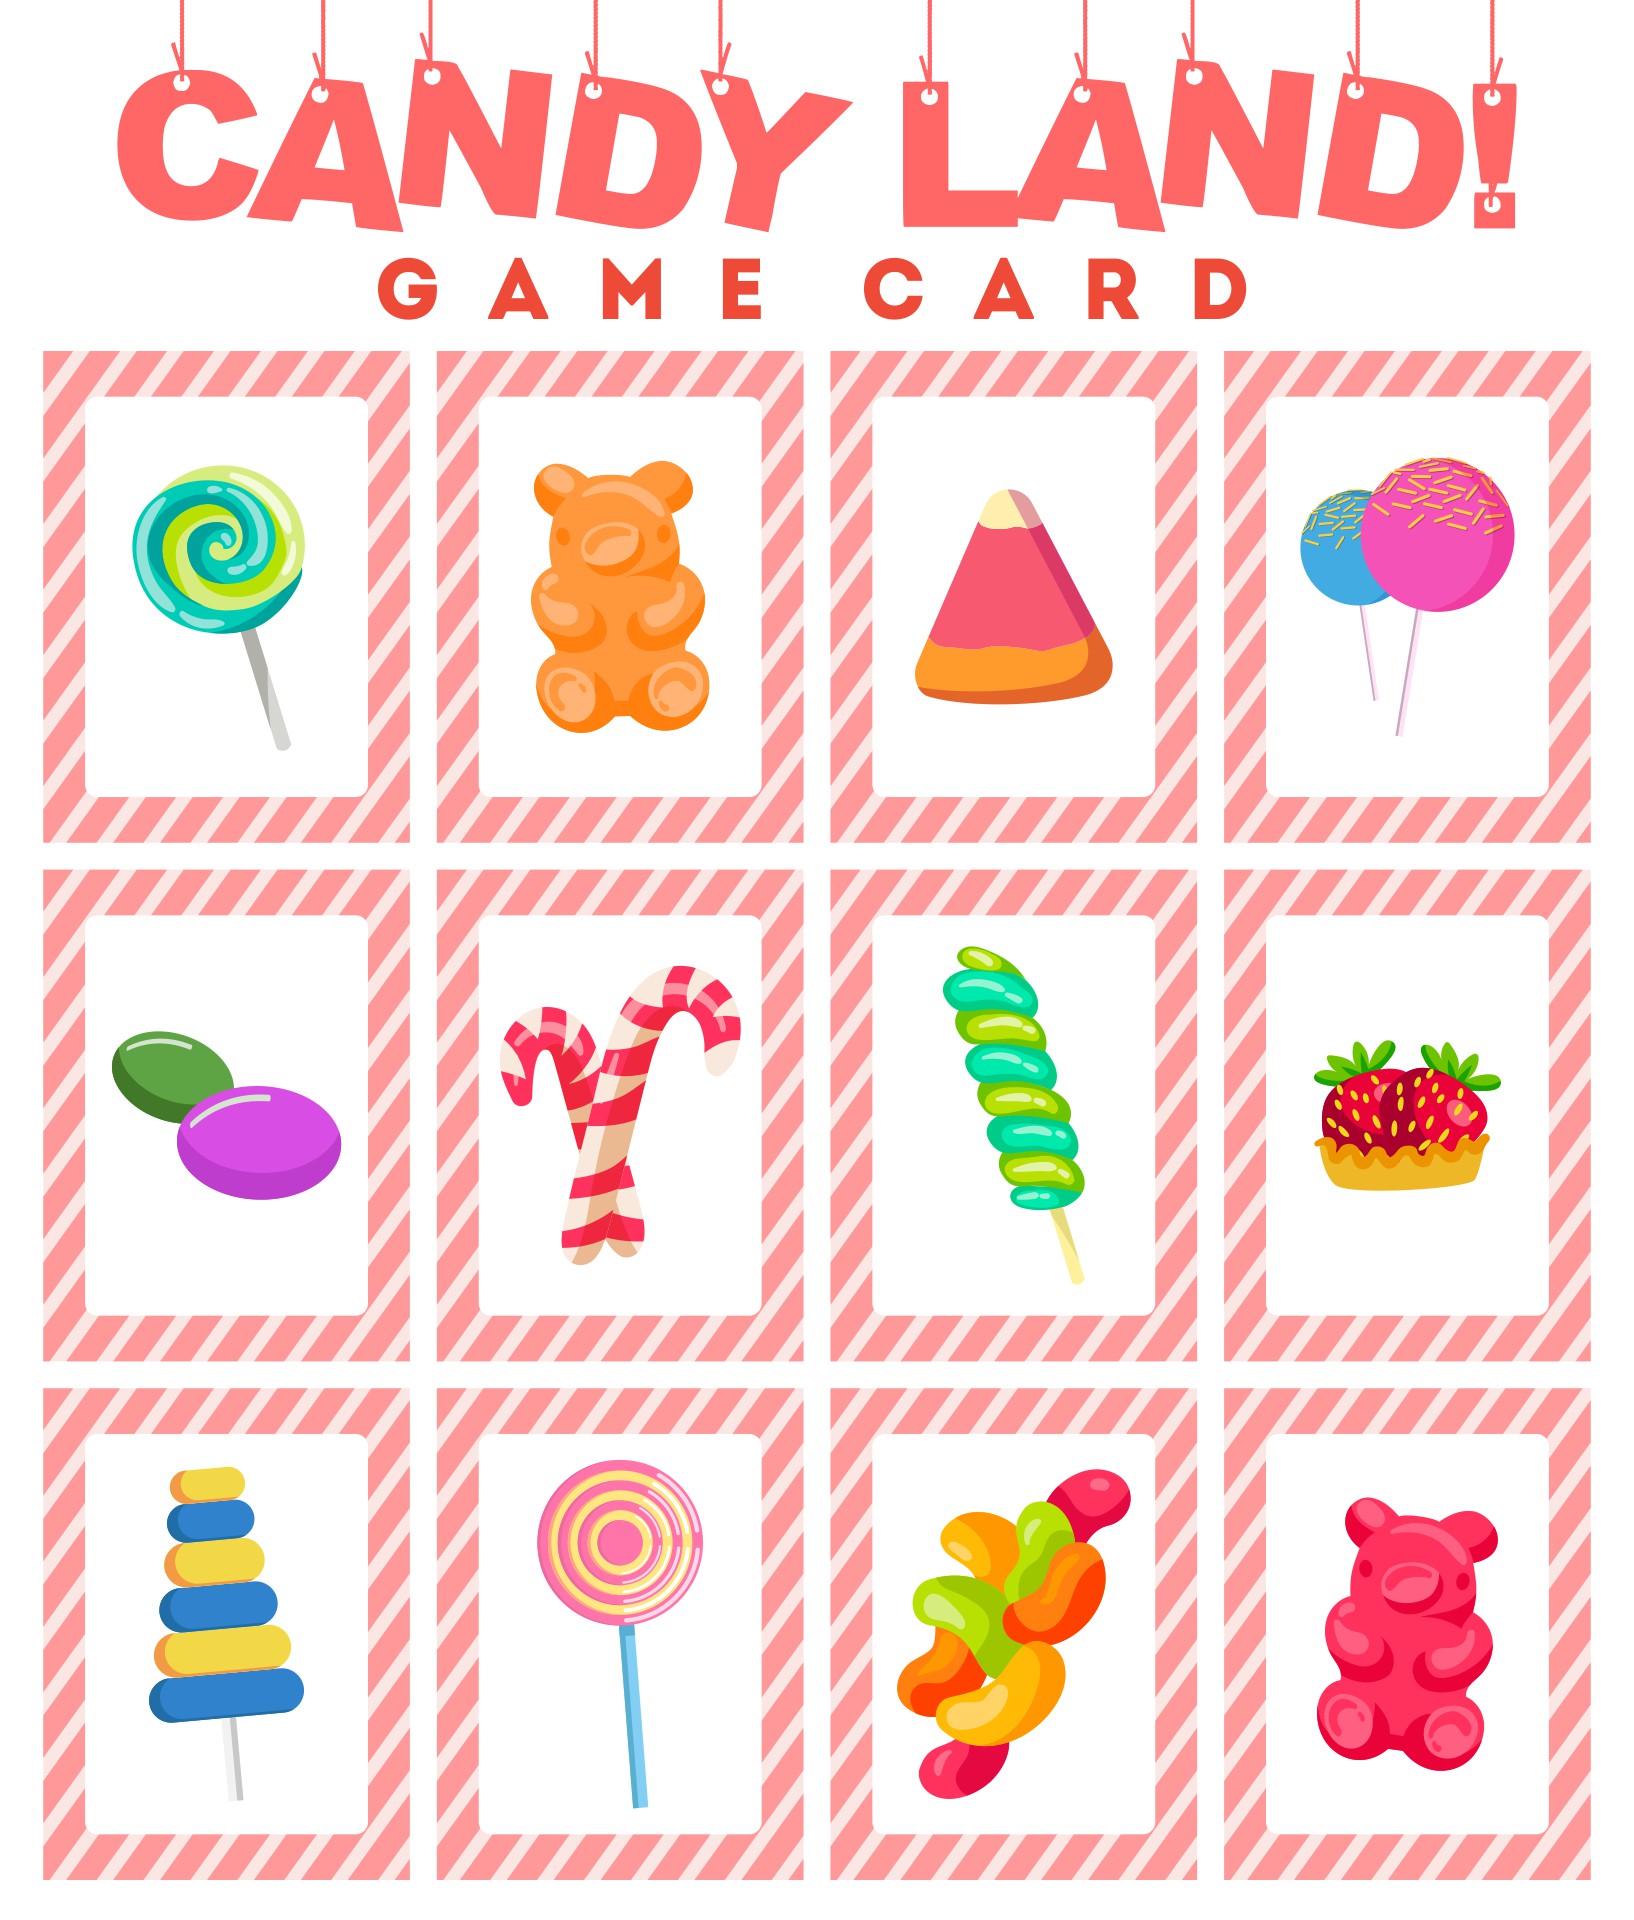 Candyland Game Cards Printout for Family Game Night